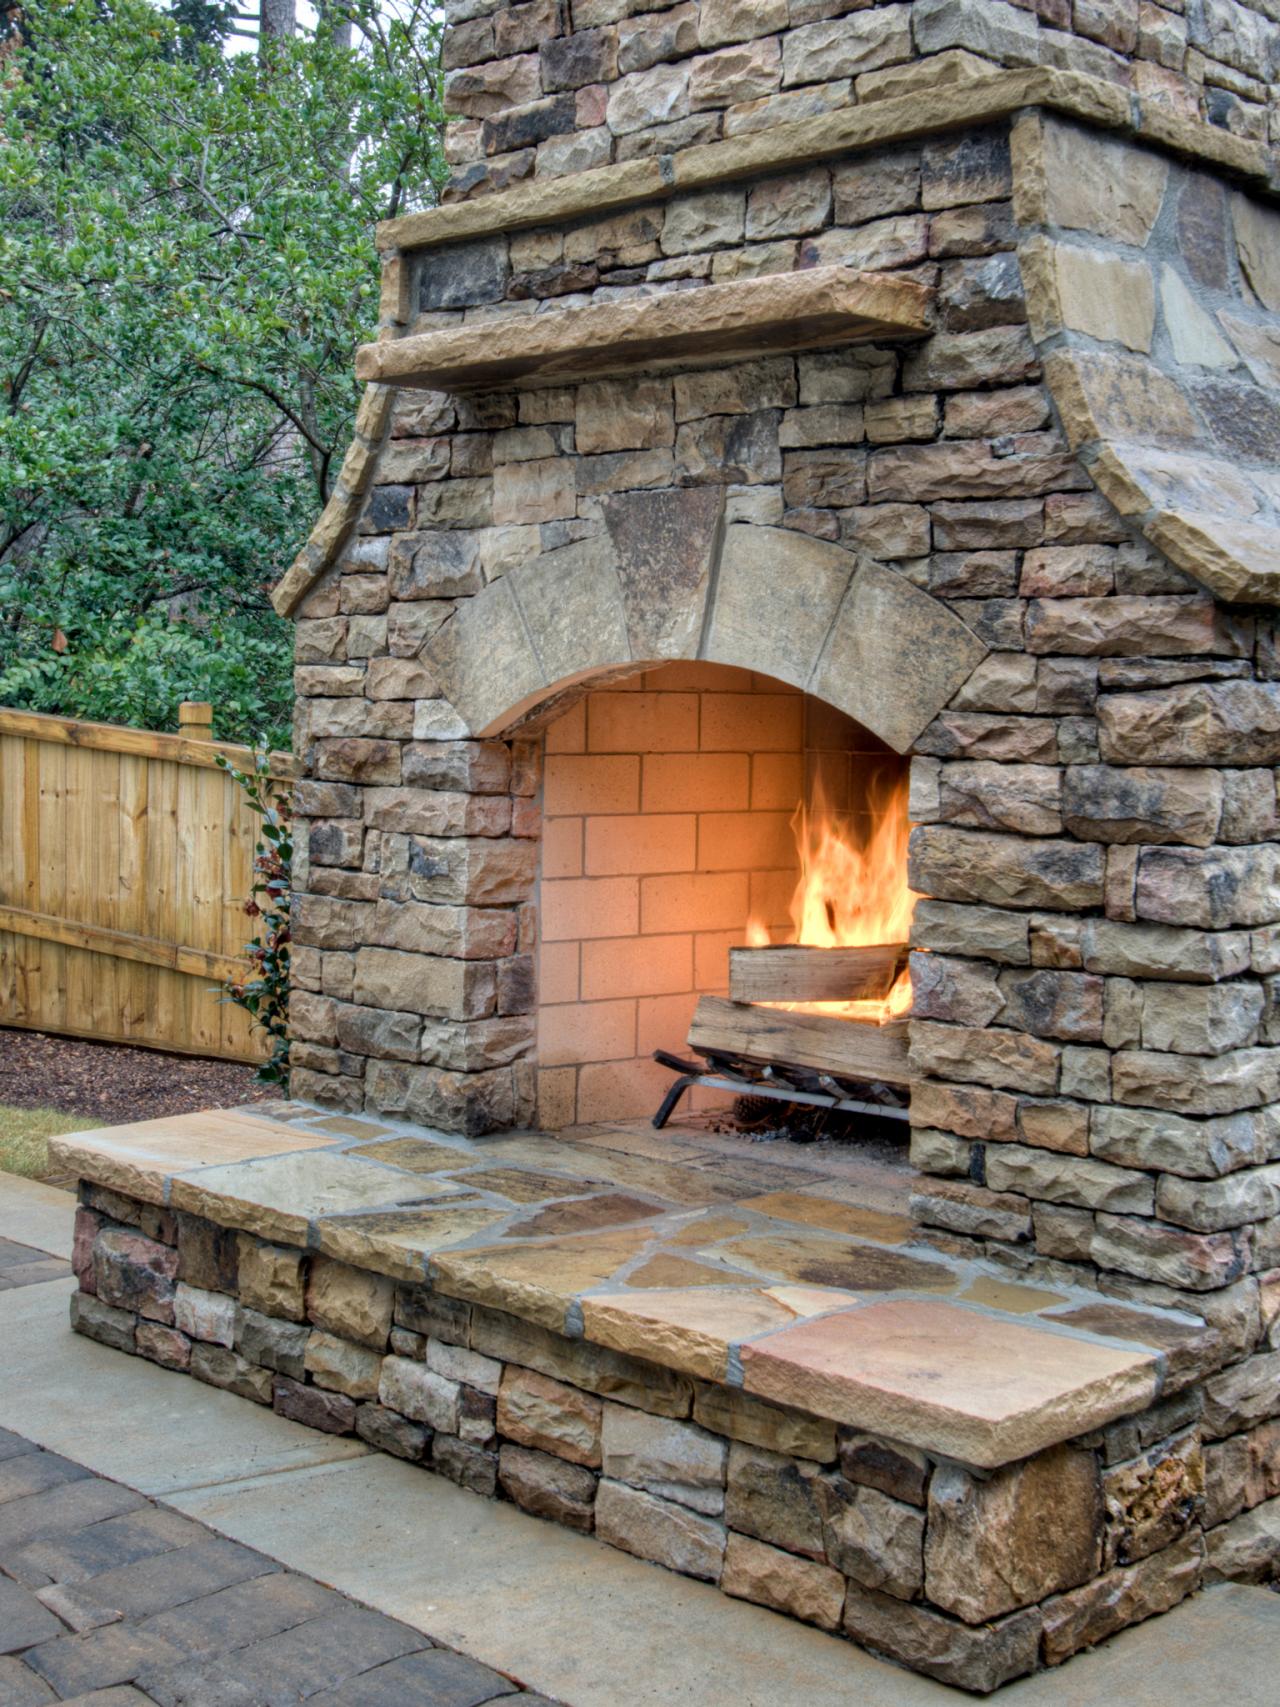 How To Build An Outdoor Fireplace, How Long Does It Take To Build An Outdoor Fireplace